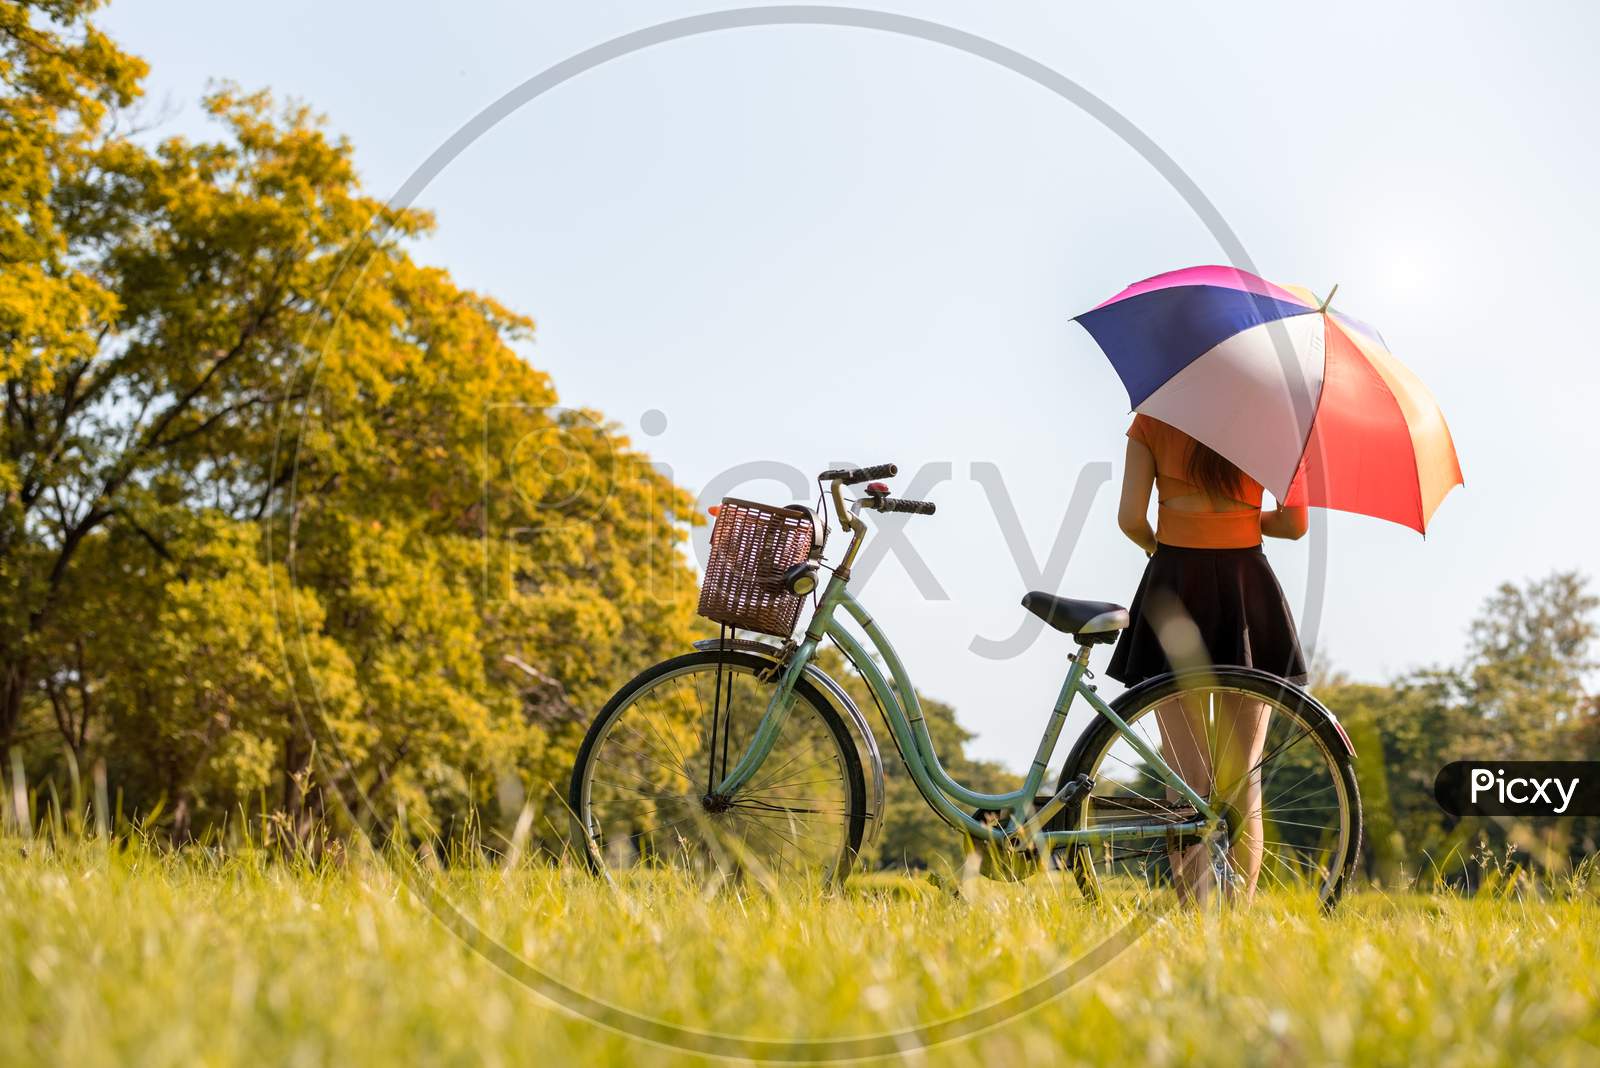 Woman With Colrful Umbrella And Bicycle In Park. People And Relaxation Concept. Season And Autumn Theme.